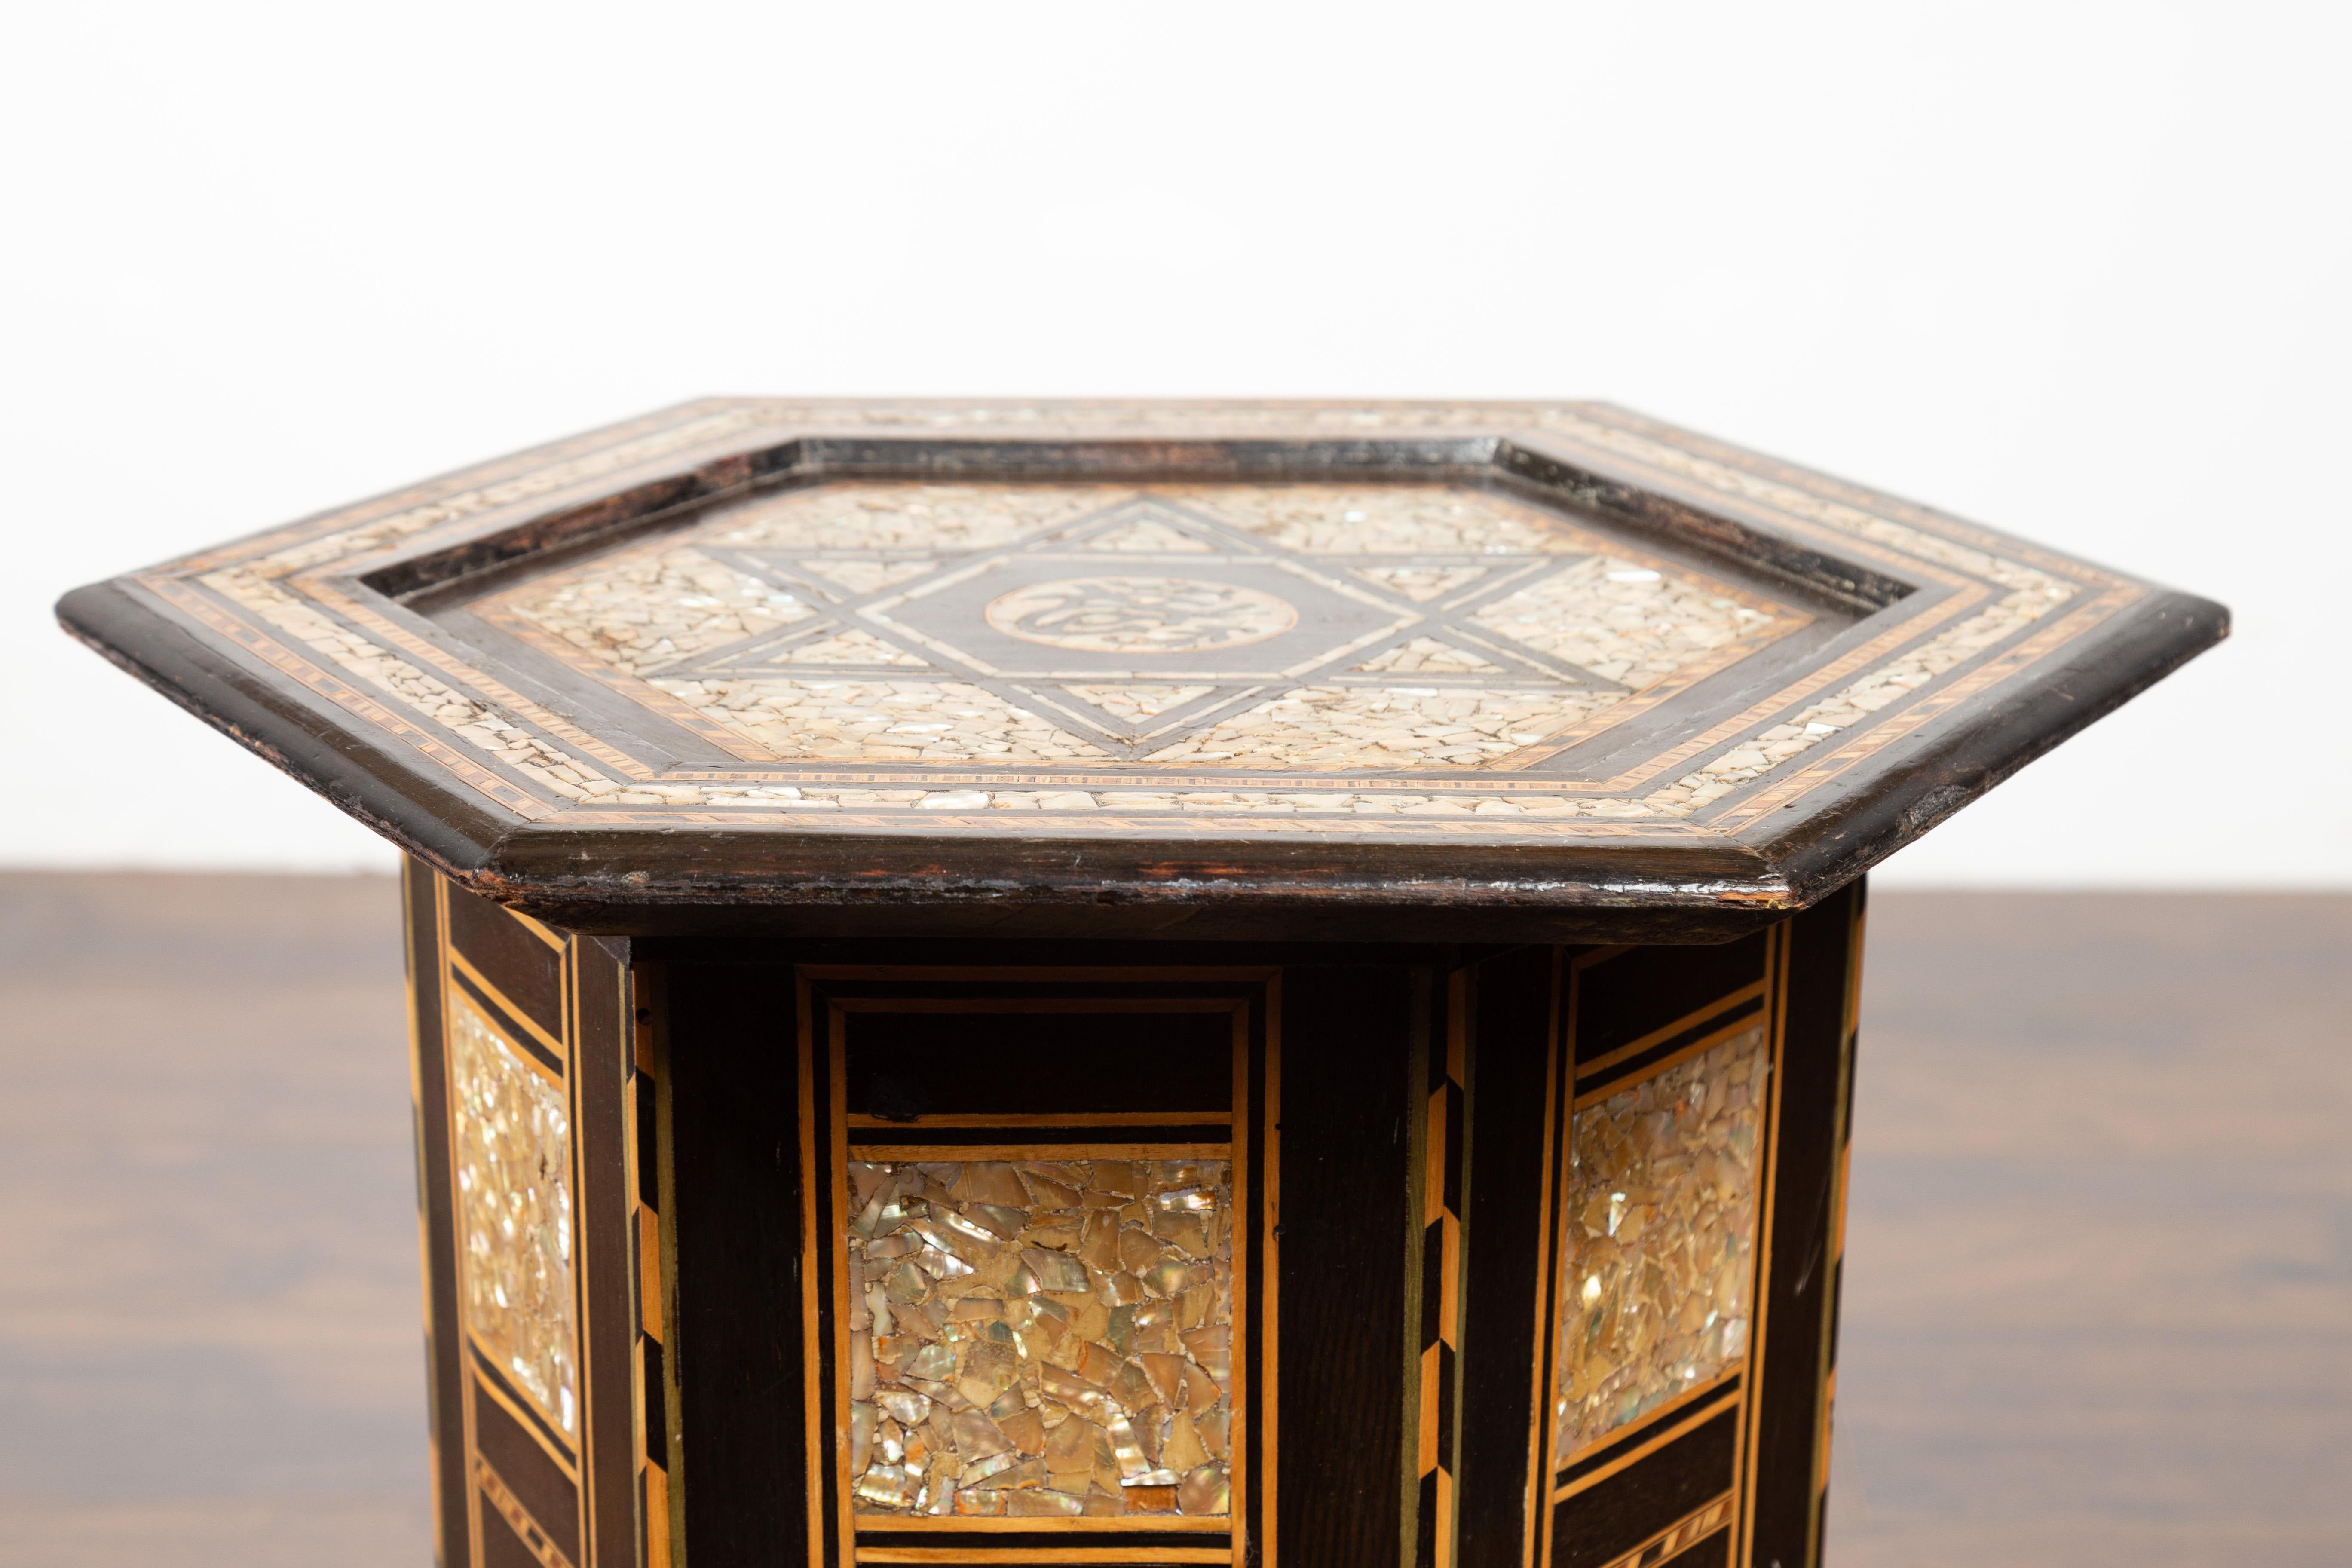 Moroccan Midcentury Side Table with Hexagonal Top and Mother-of-Pearl Inlay For Sale 2